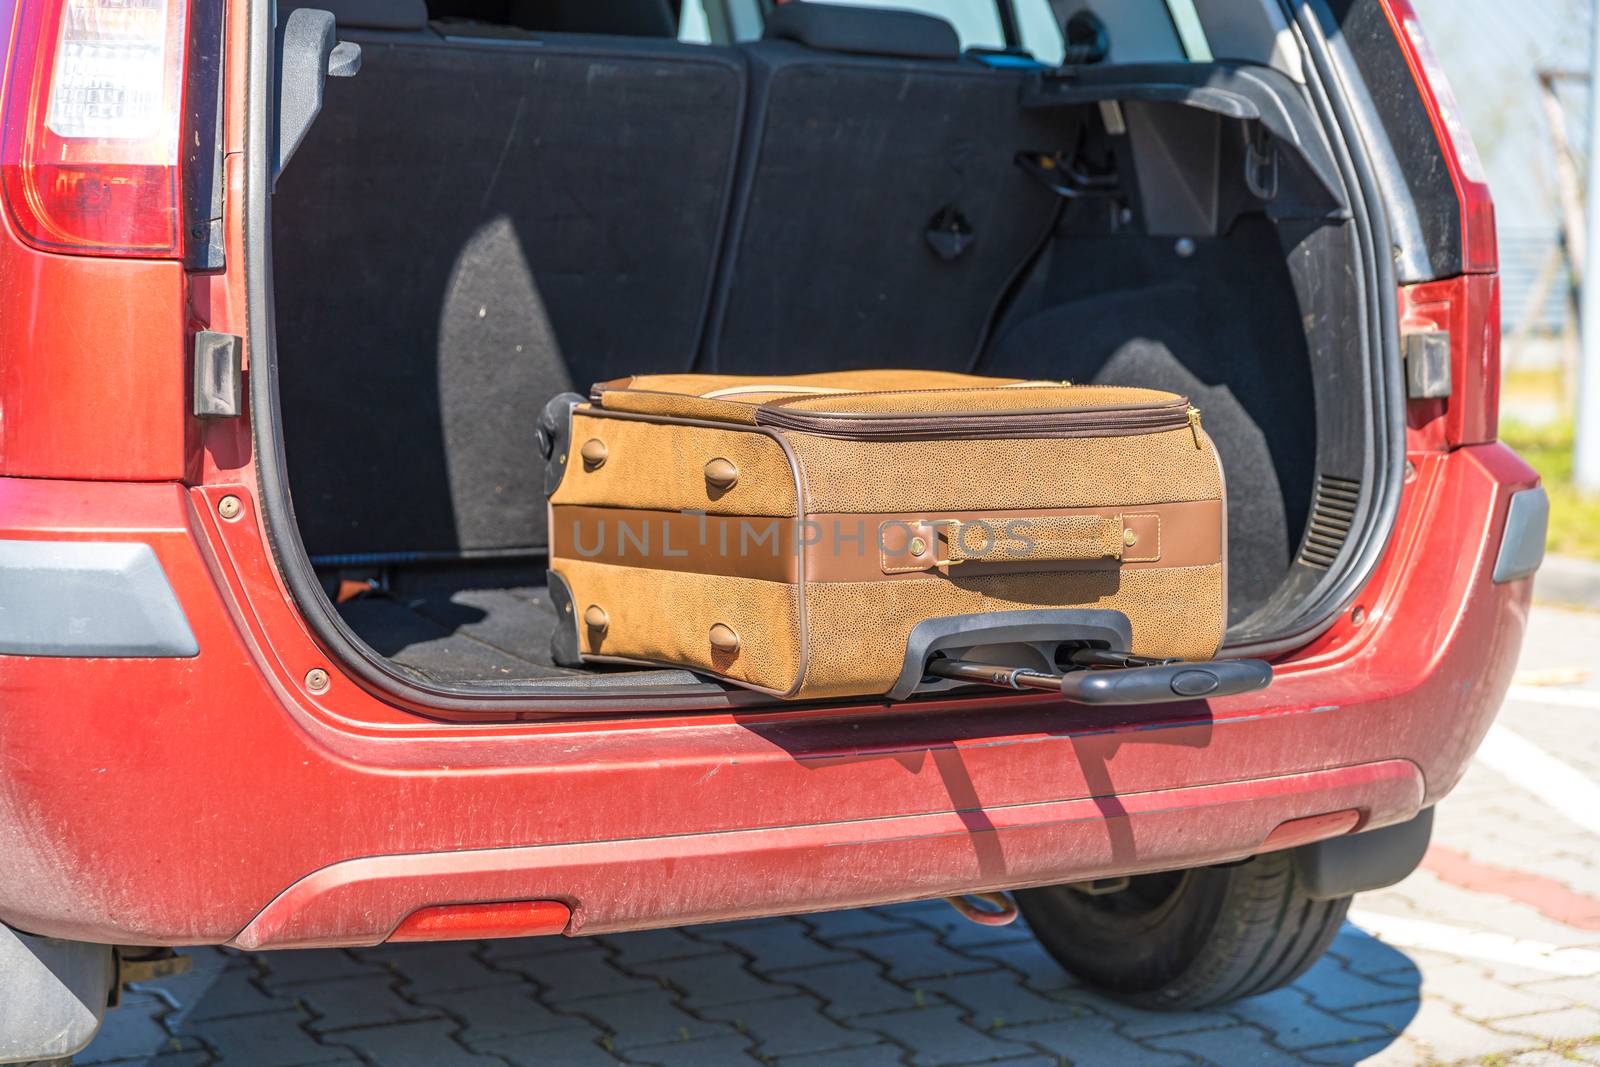 luggage in the trunk of a passenger car.